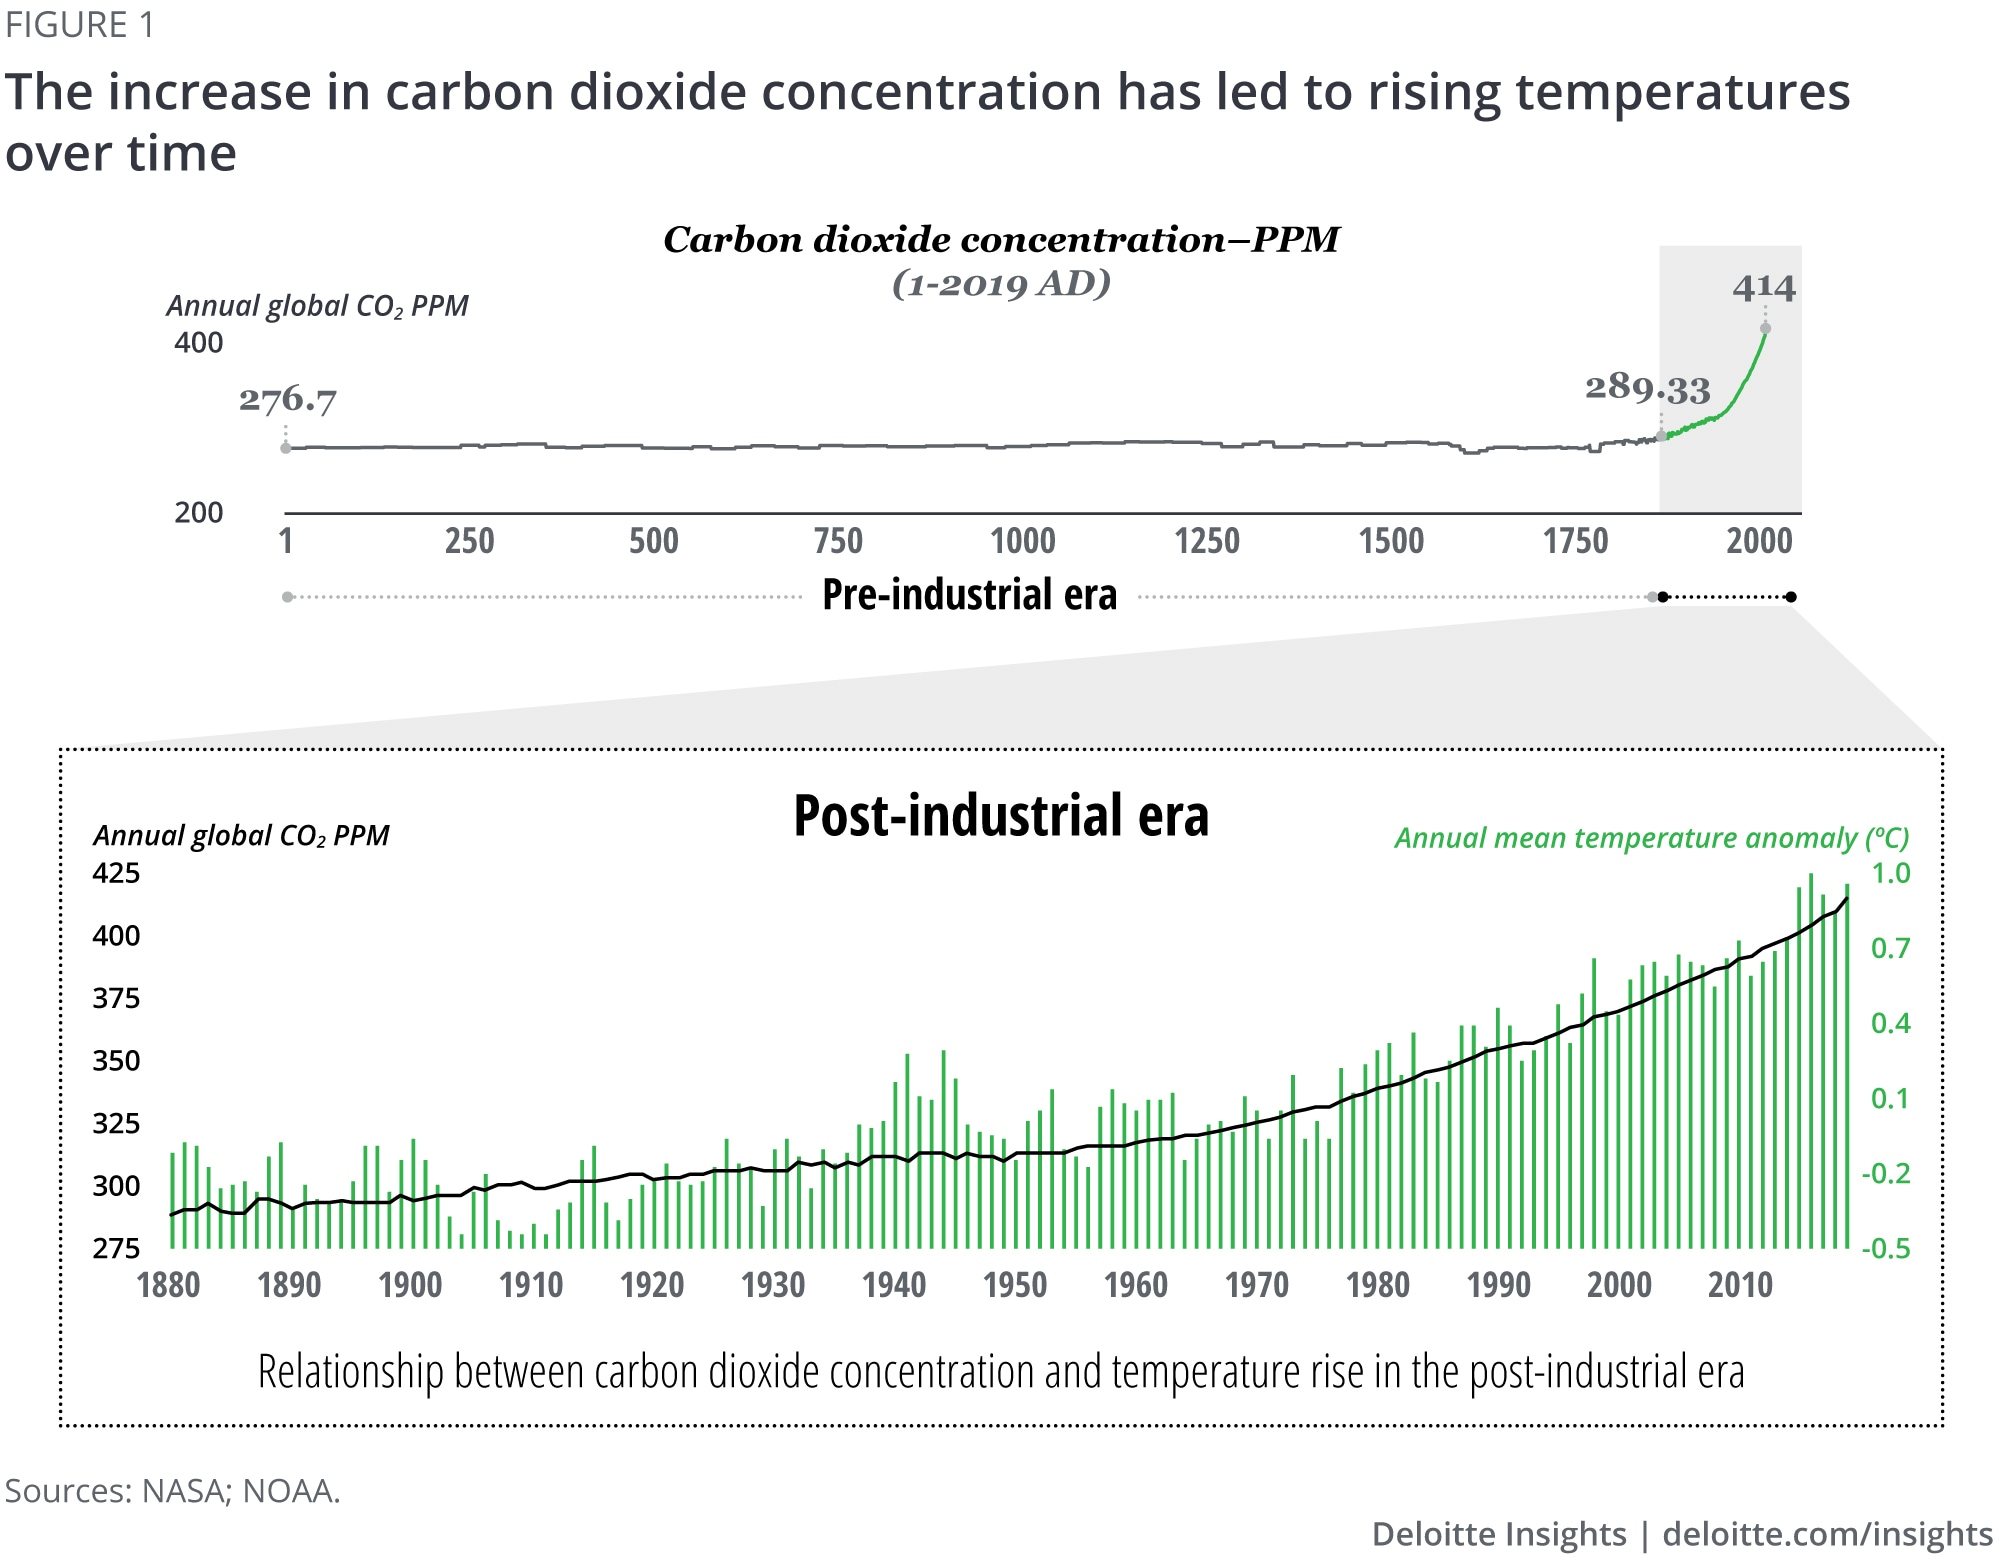 The increase in carbon dioxide concentration has led to soaring temperatures over time